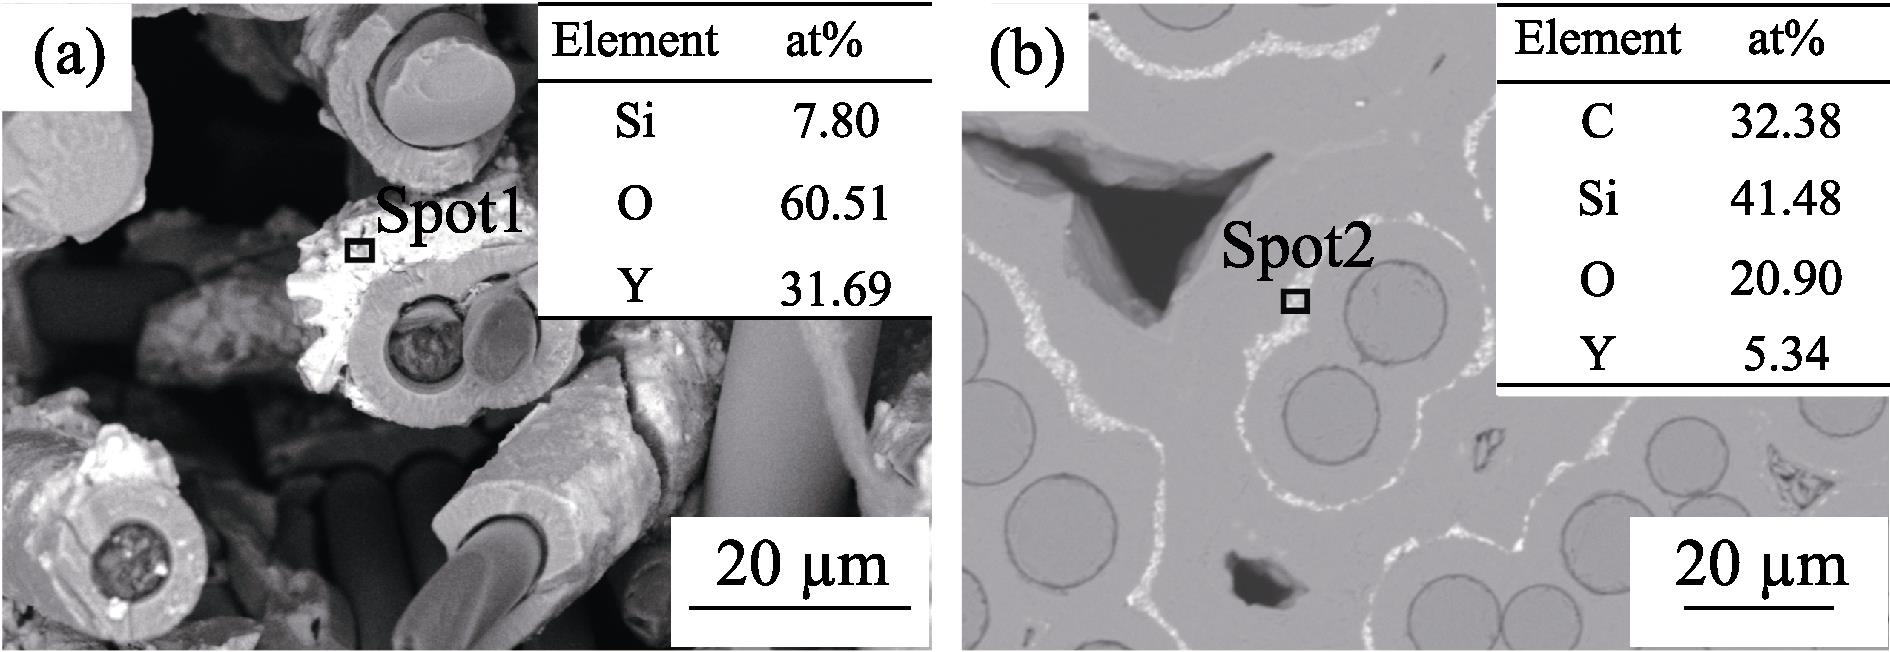 SEM images of samples (a) P1 and (b) C1 with insets showing EDS analysis of the white region in sample P1 and C1